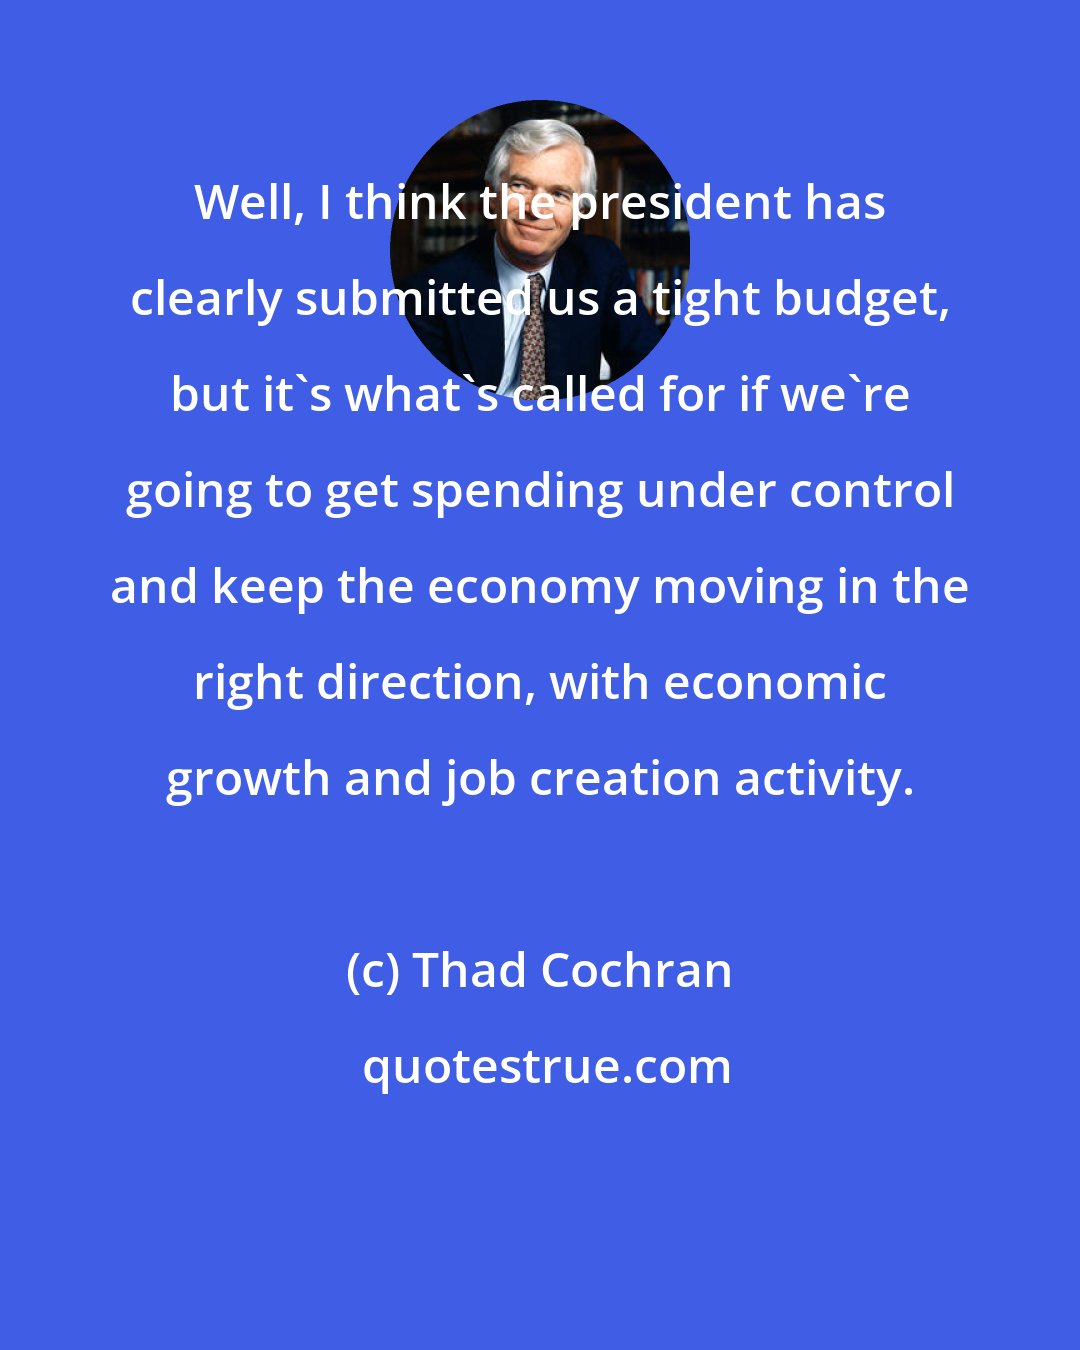 Thad Cochran: Well, I think the president has clearly submitted us a tight budget, but it's what's called for if we're going to get spending under control and keep the economy moving in the right direction, with economic growth and job creation activity.